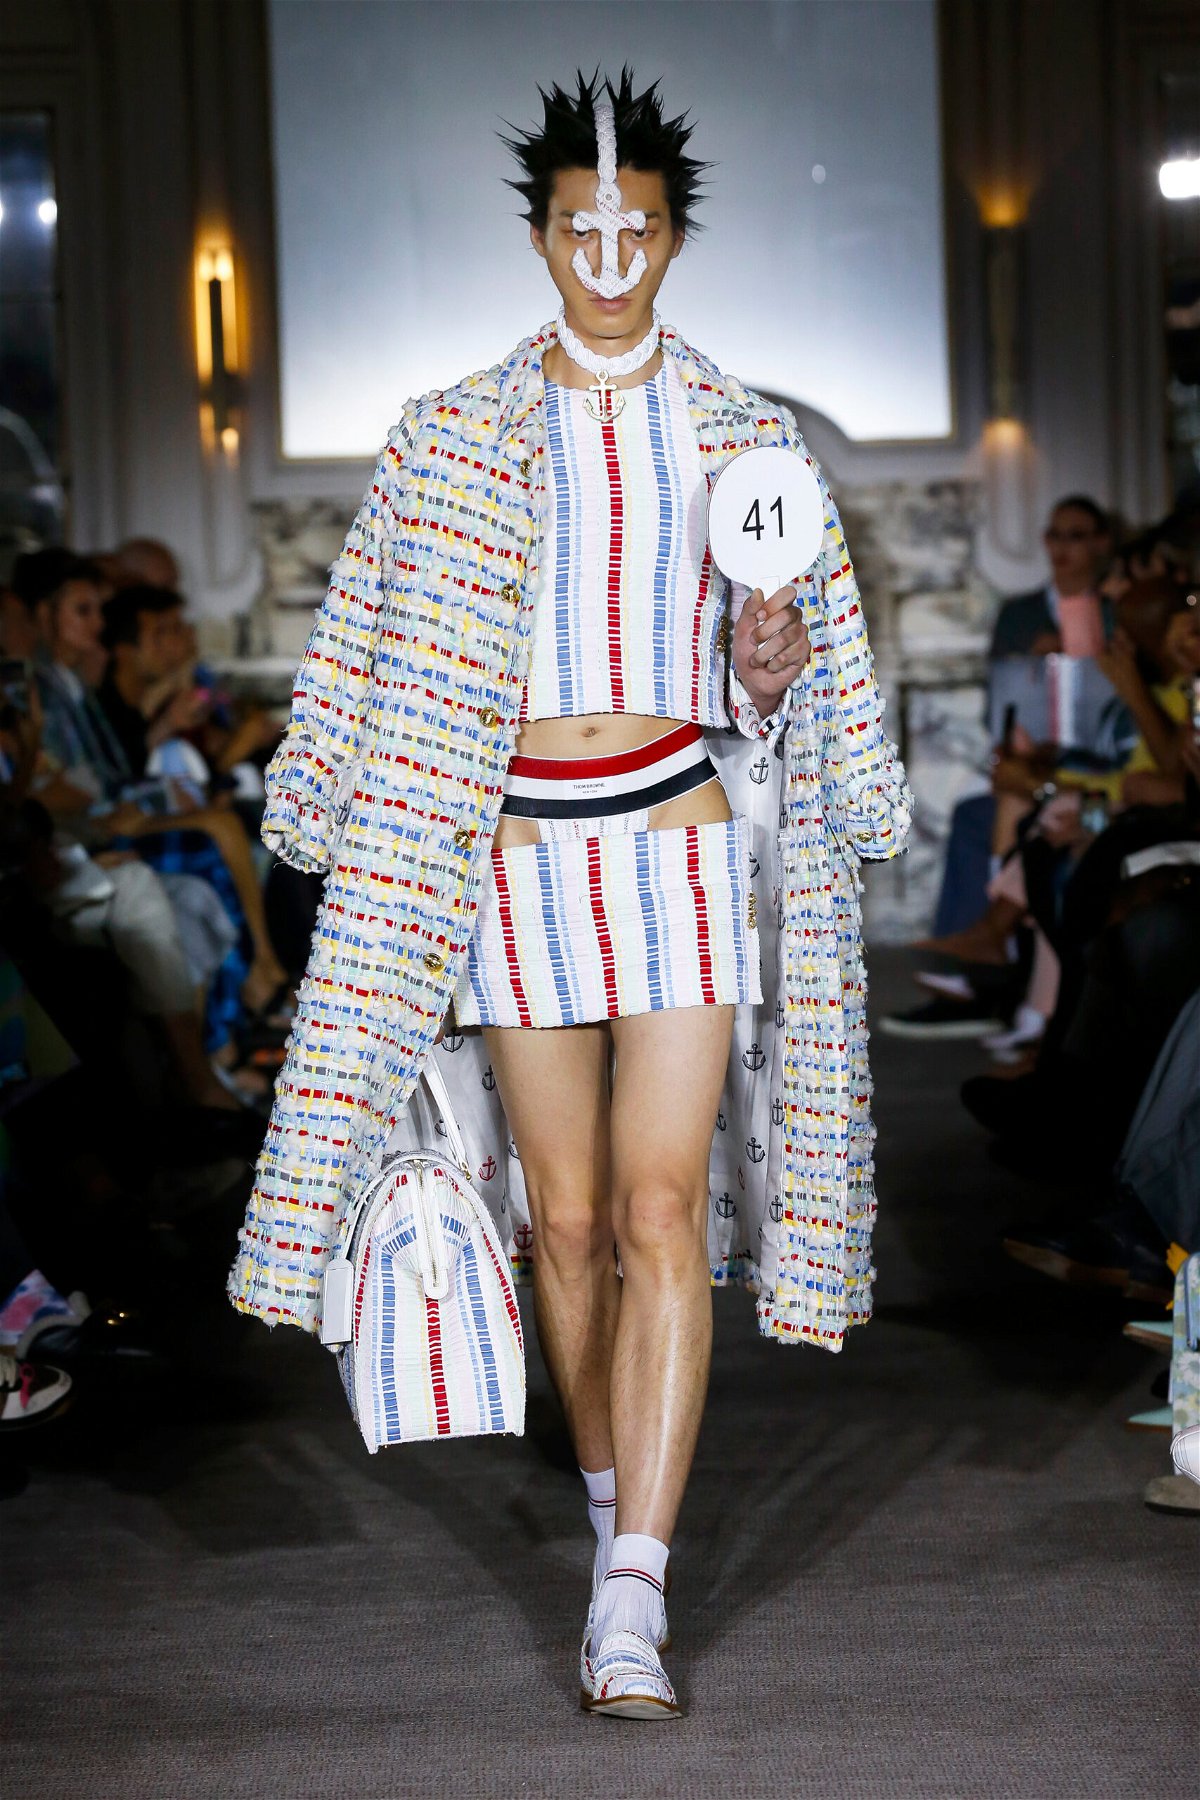 Paris Fashion Week: Menswear designers turn up the heat for the